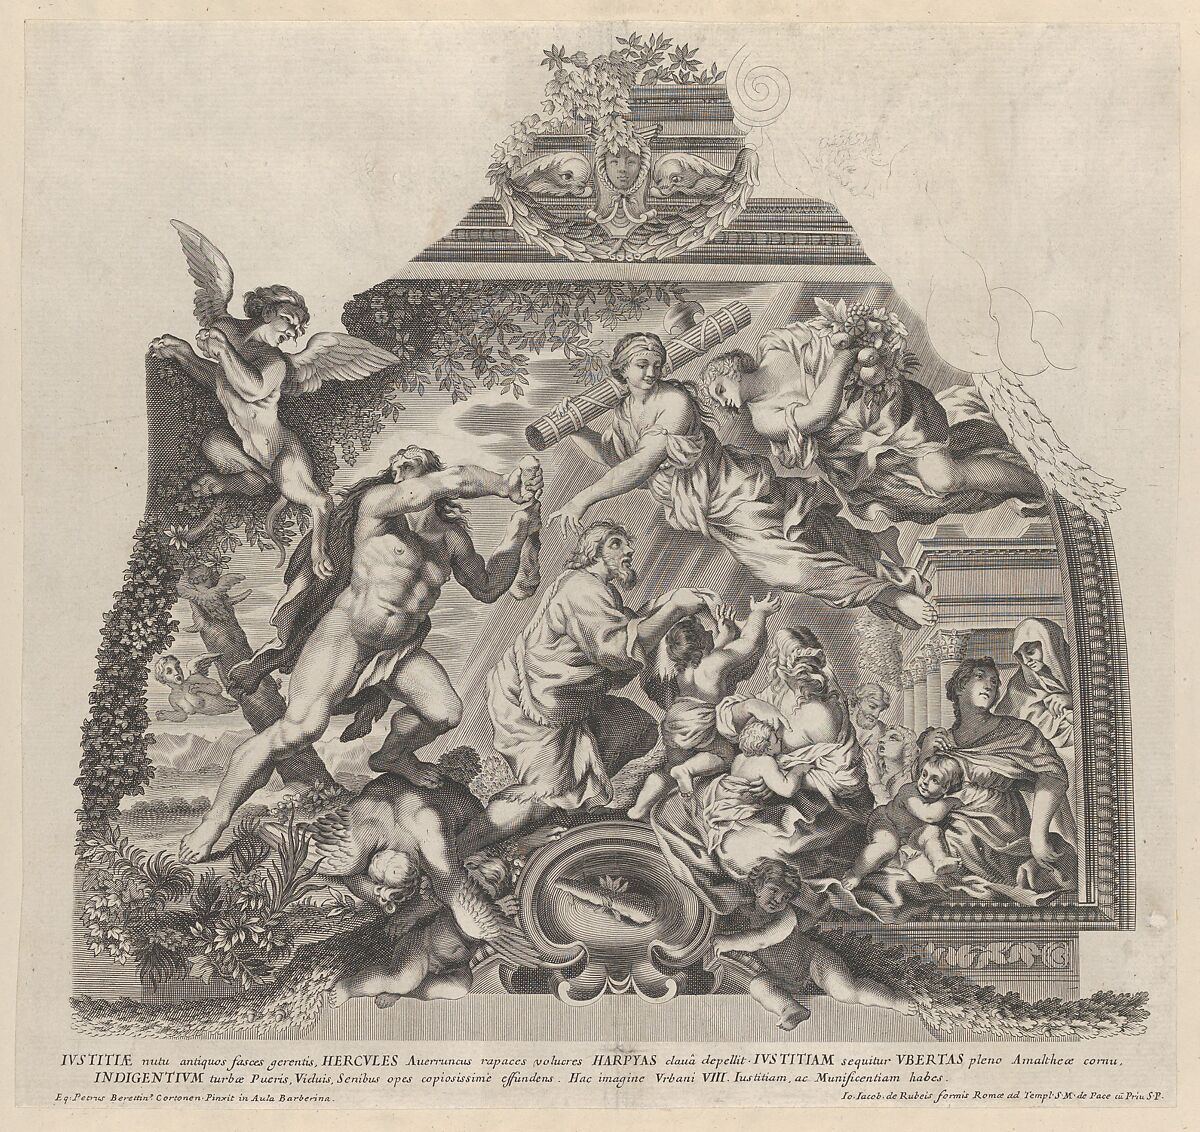 Plate 6: Allegory with Hercules chasing off the Harpies as Justice and Plenty aid the poor, from Barberinae aulae fornix, Anonymous, Italian, 17th century, Engraving 